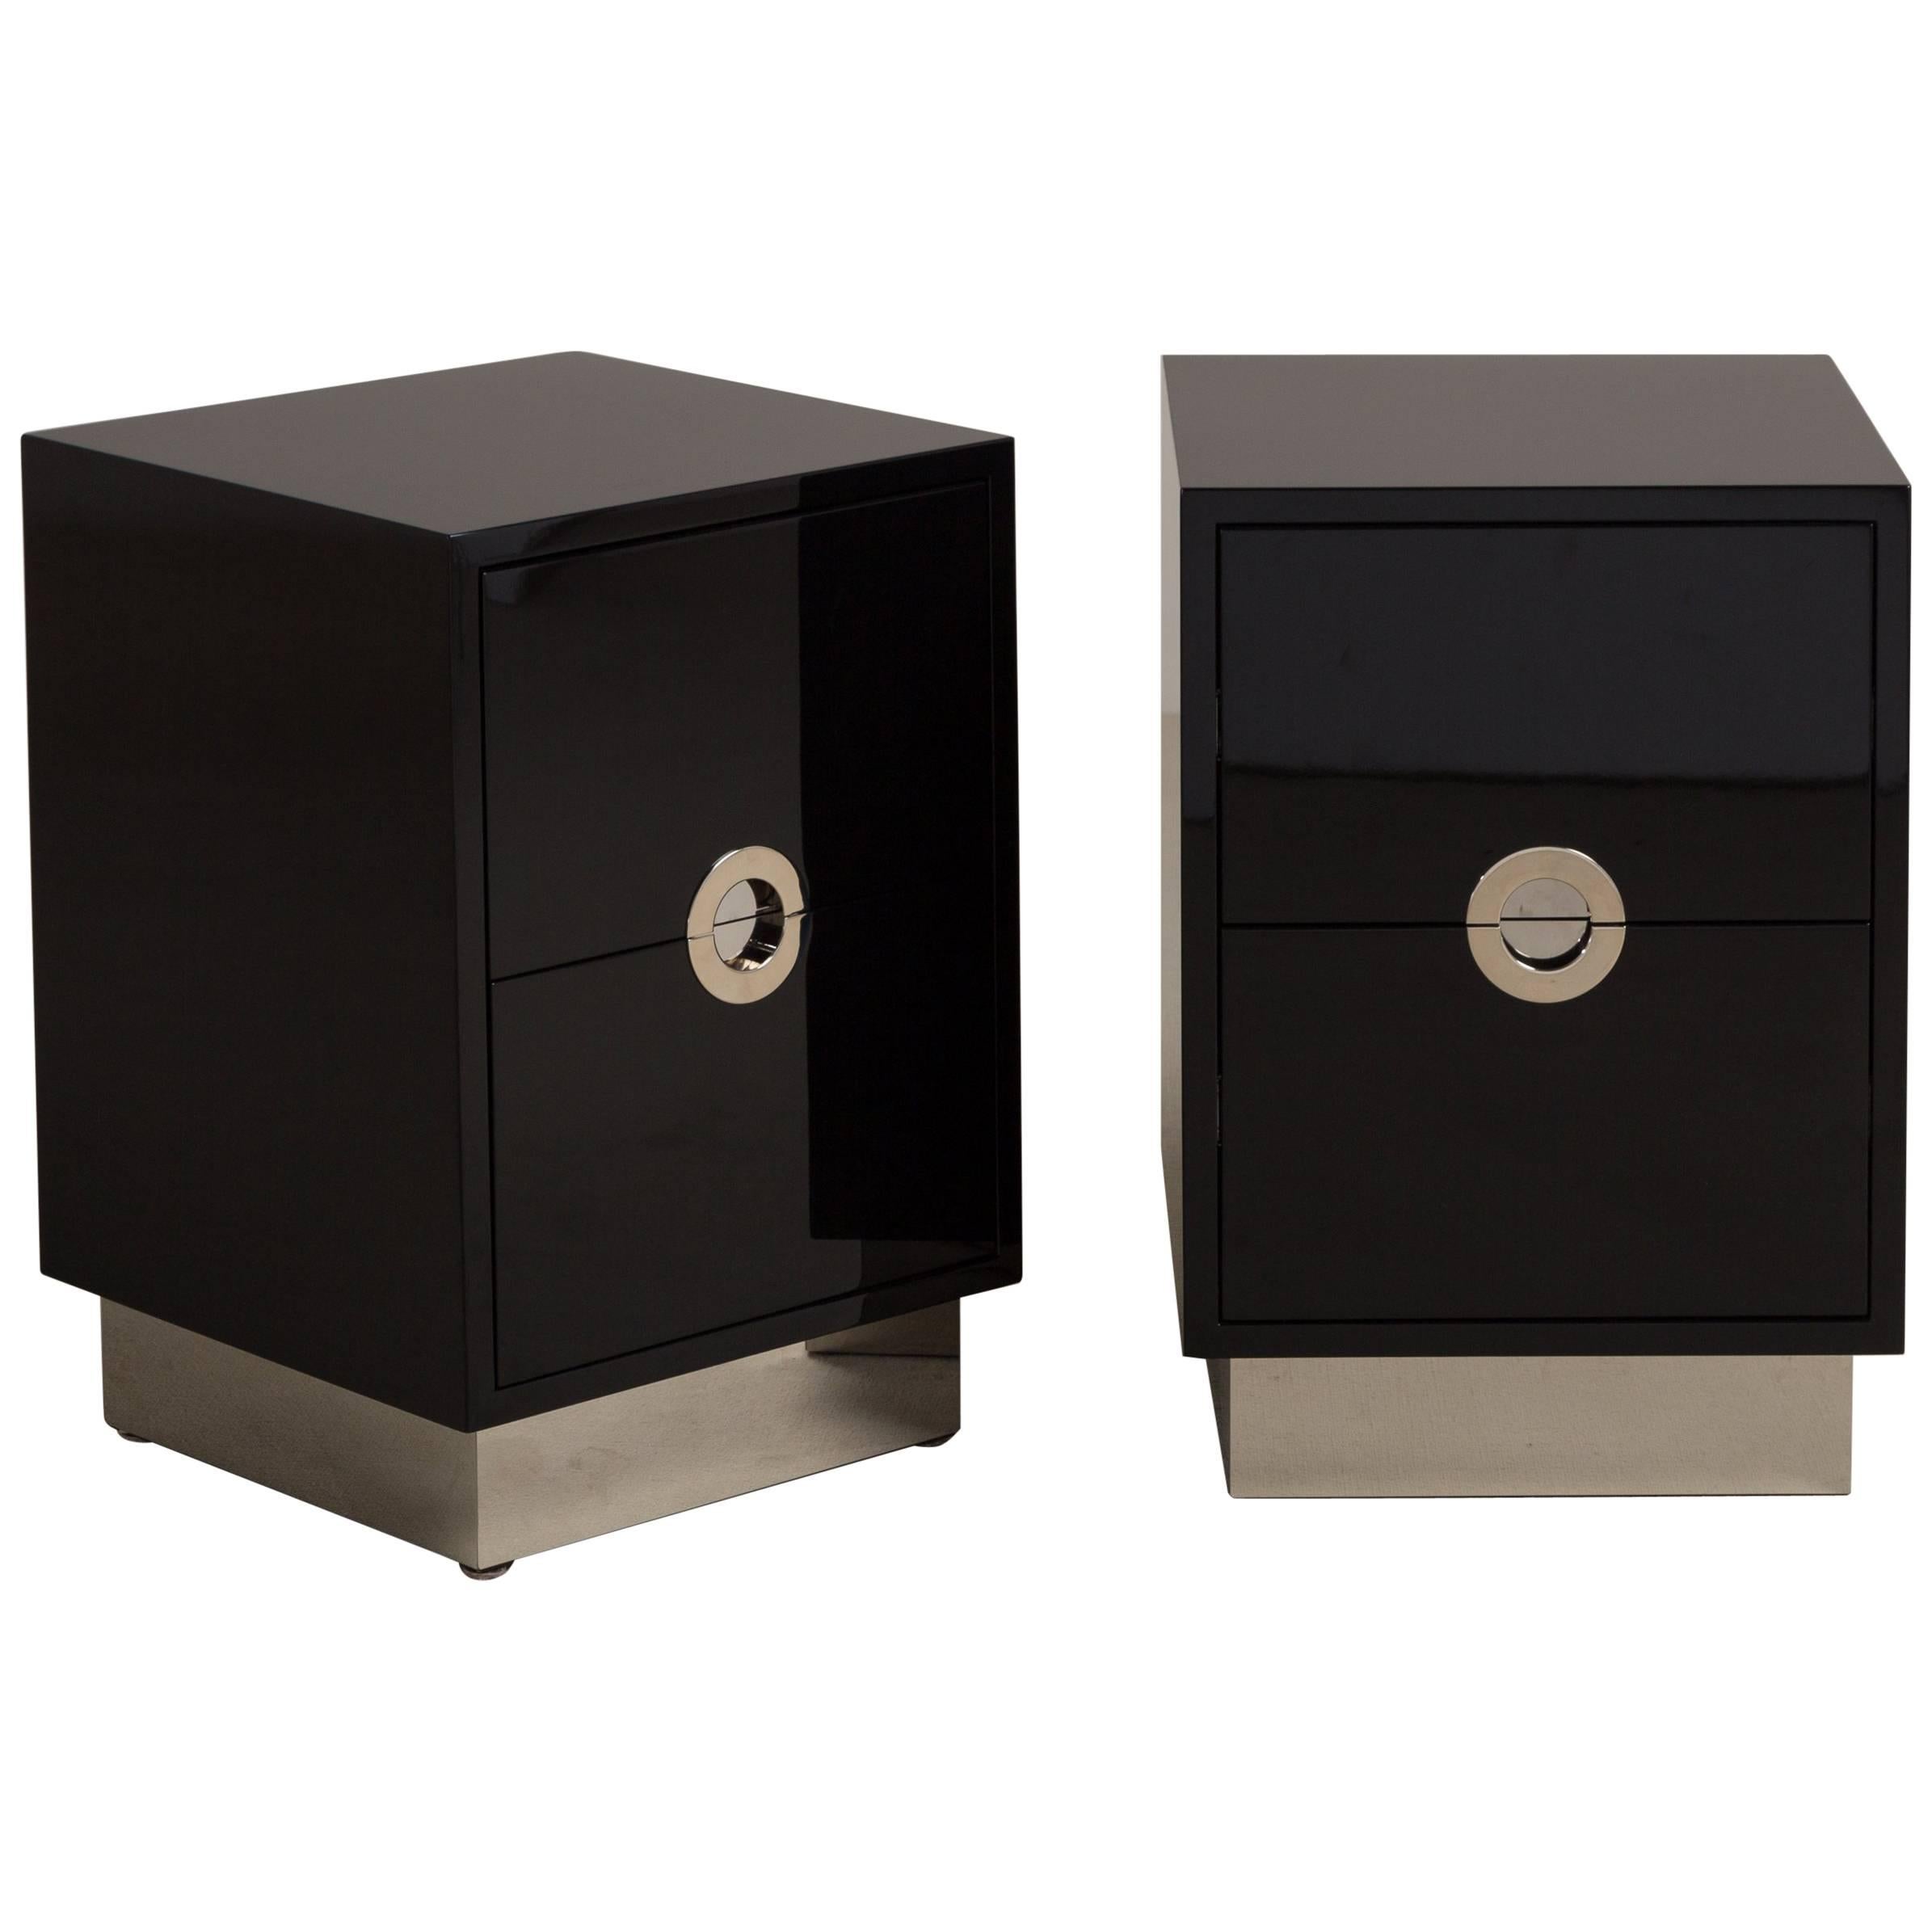 Lacquered Porthole Bedside Cabinets by Talisman Bespoke For Sale